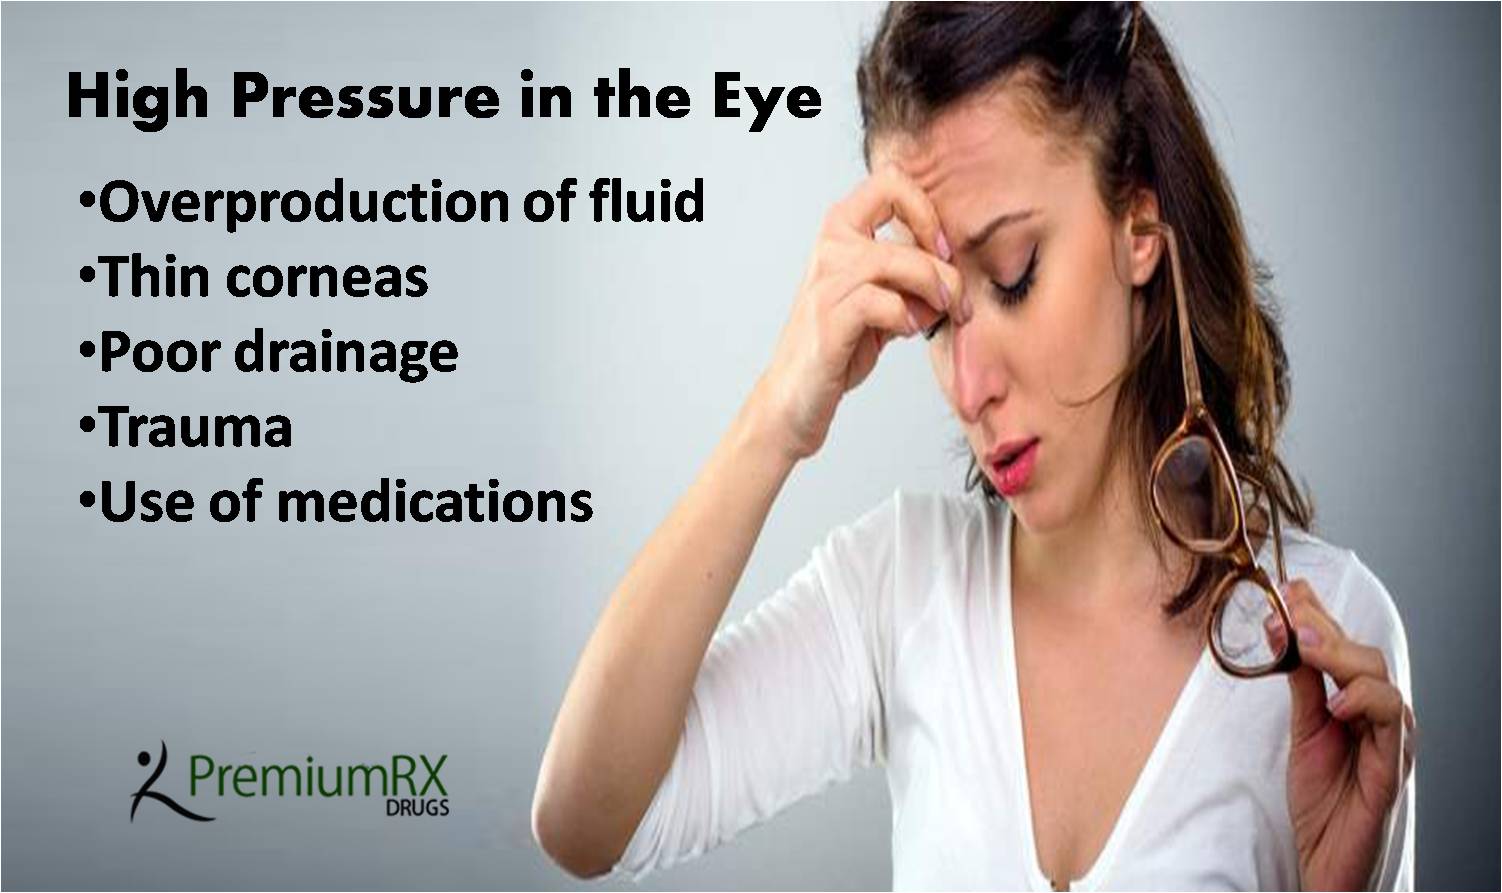 What are the Causes of High Pressure in the Eye